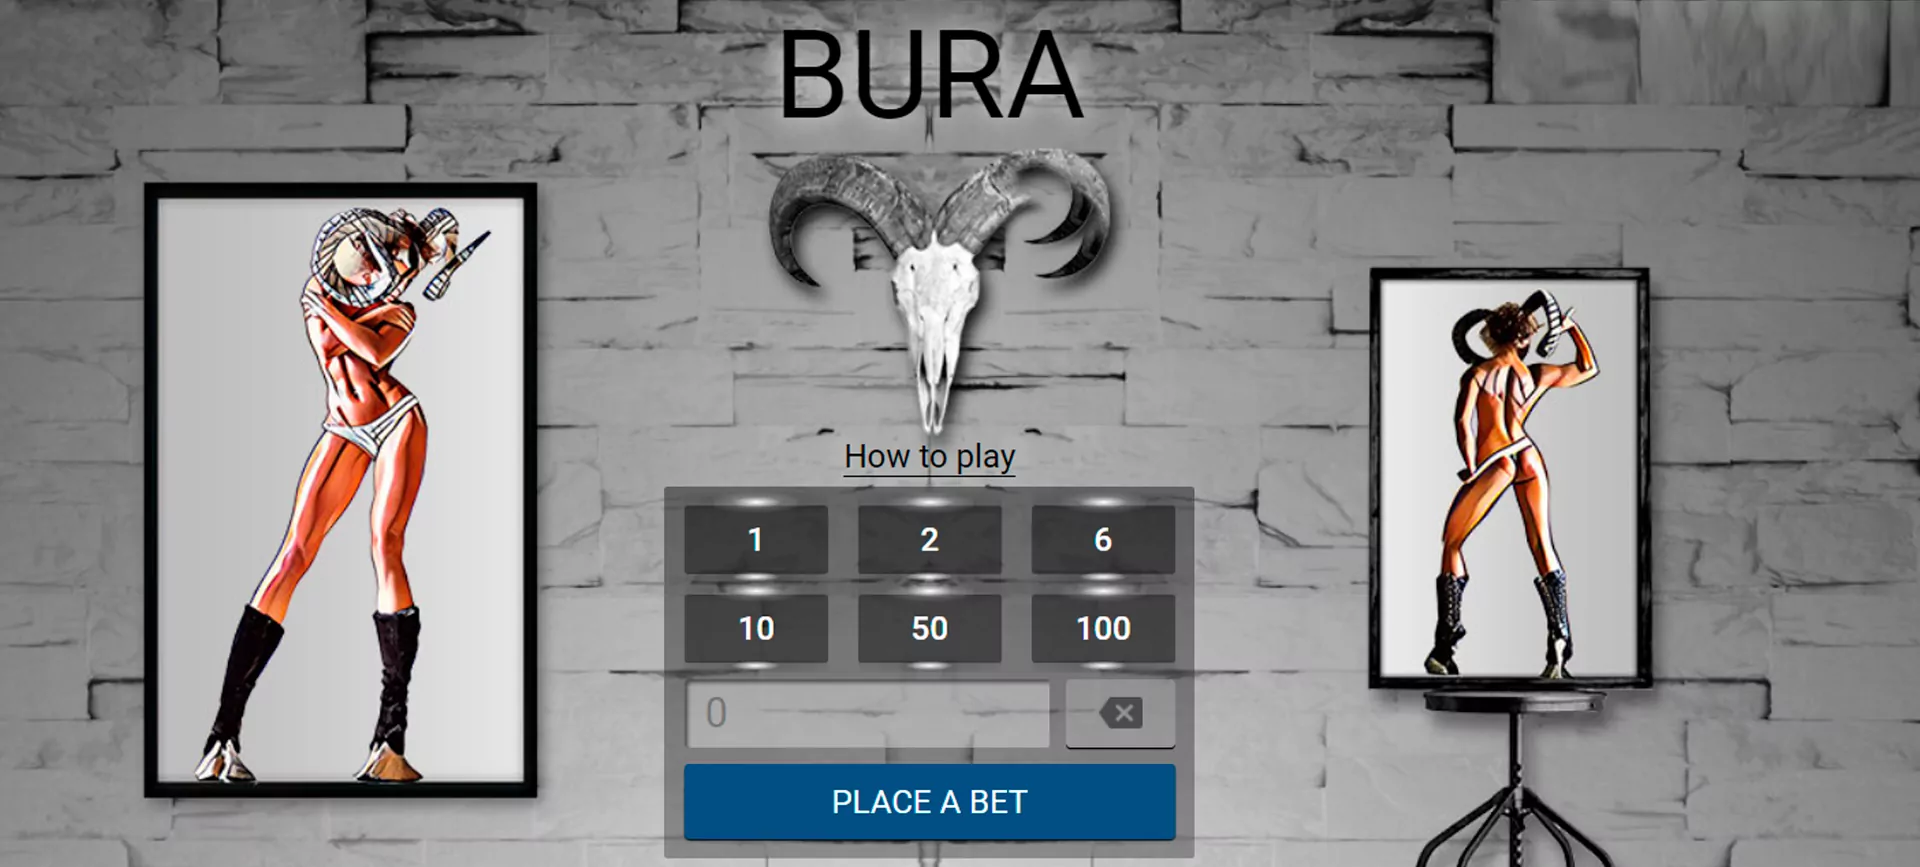 Play online in the Bura game.